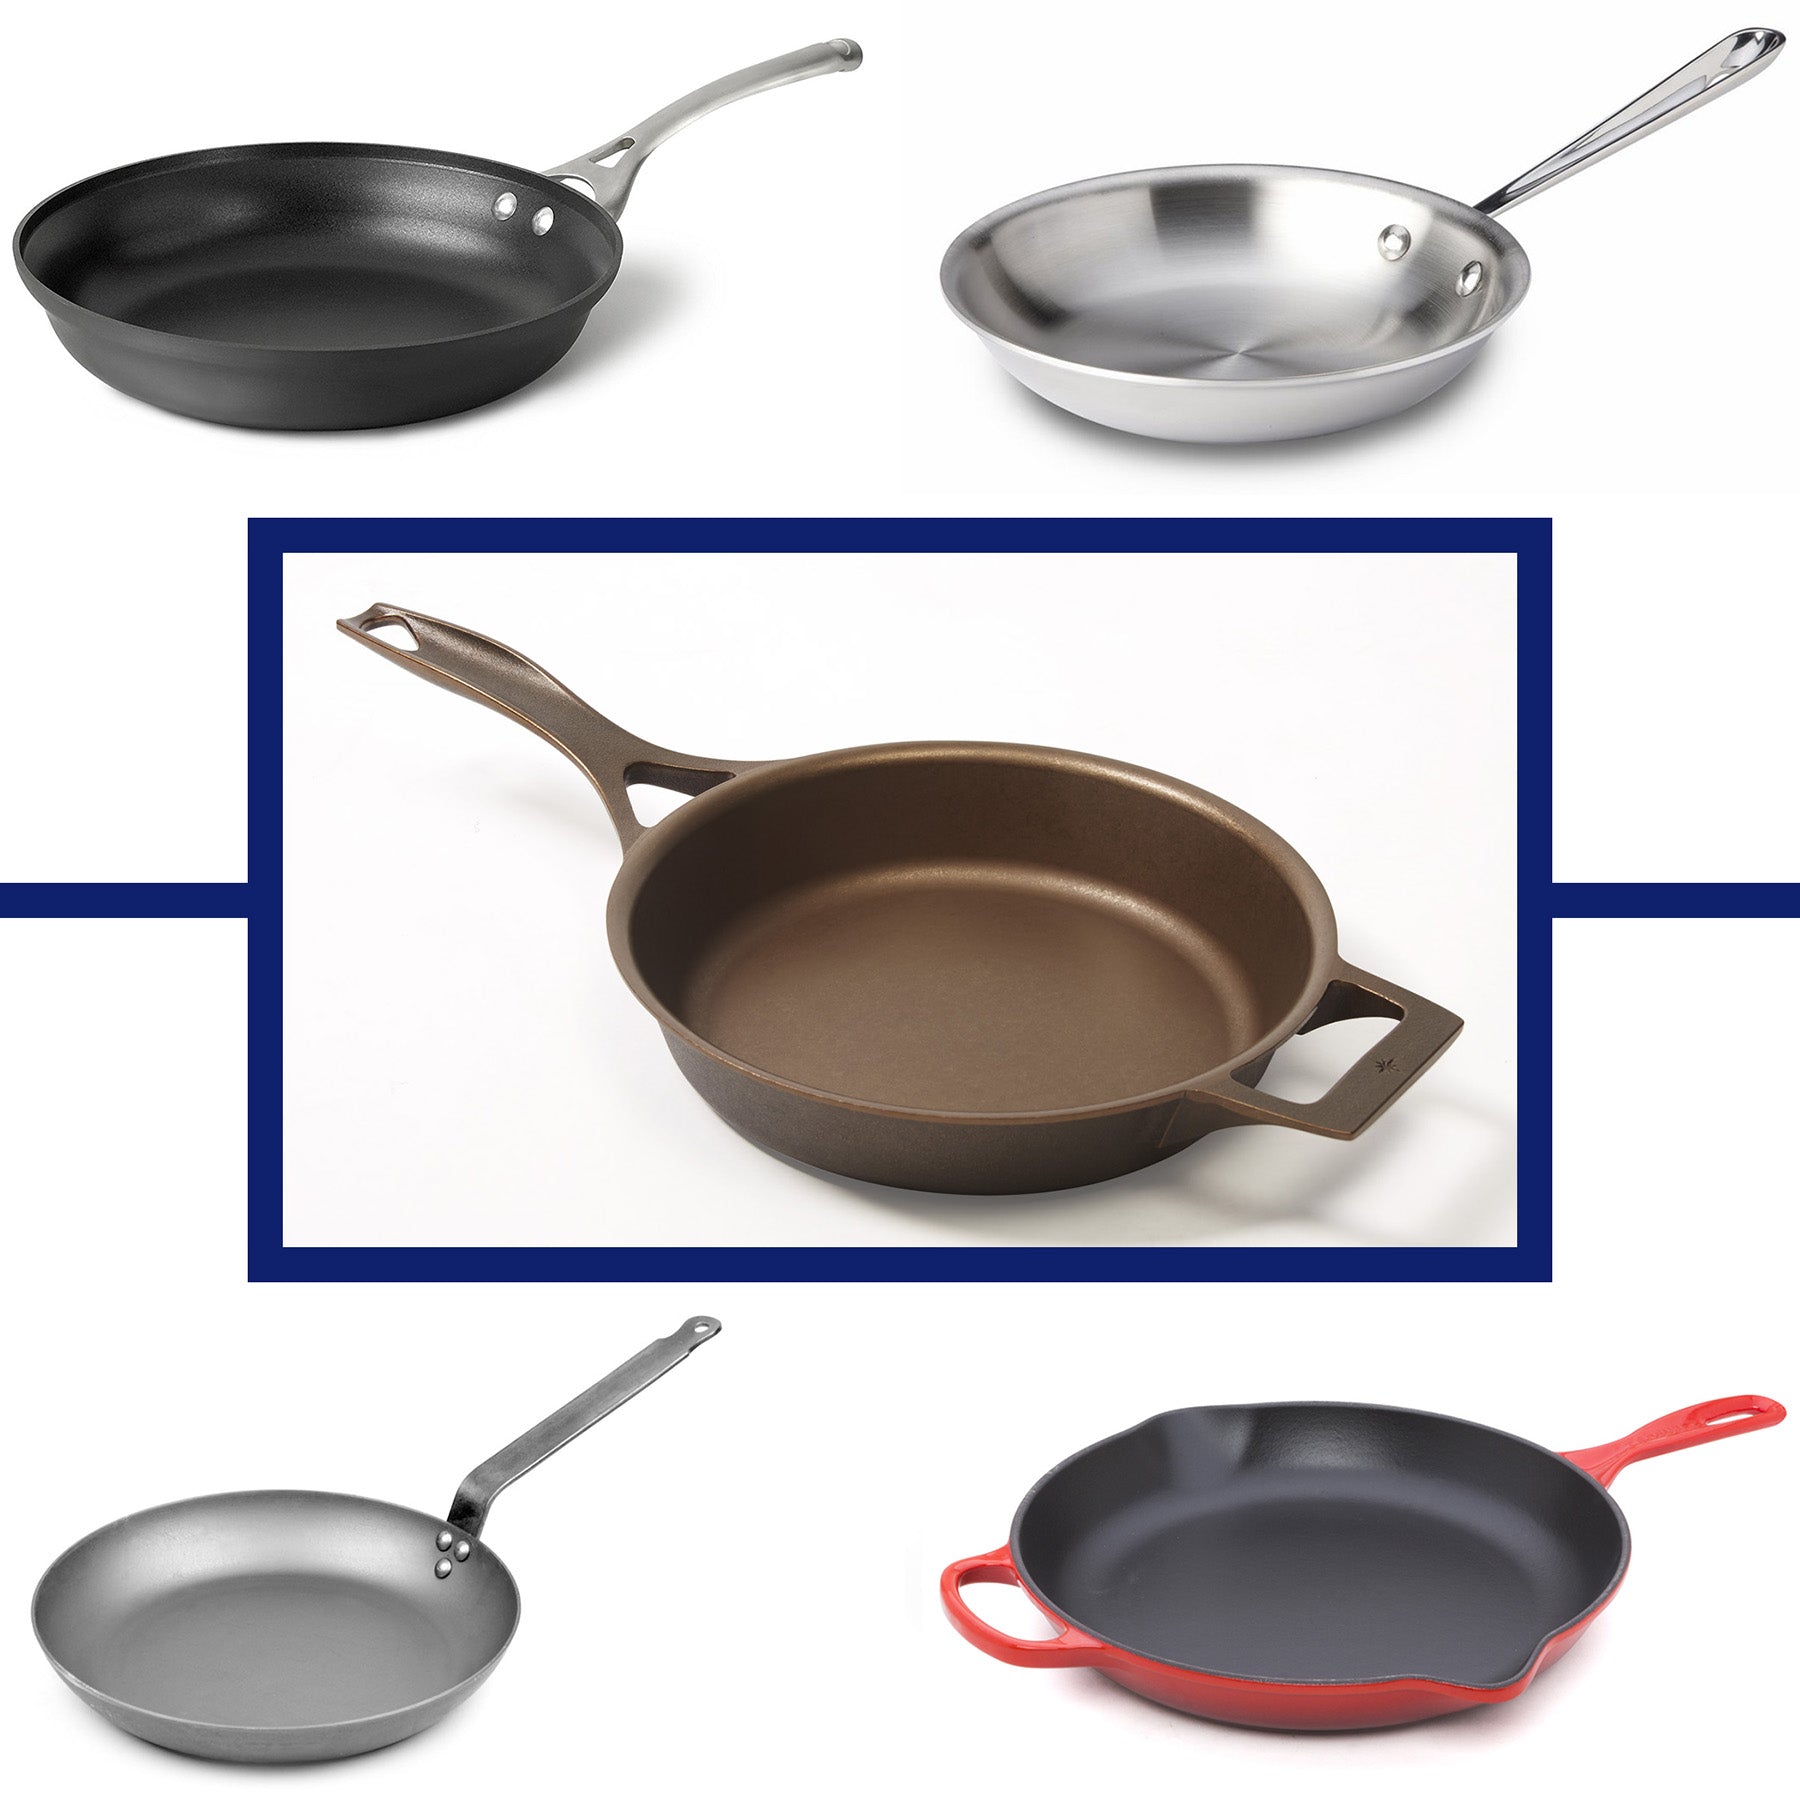 How Good is Aluminum Cookware? Discover Its Pros and Cons!